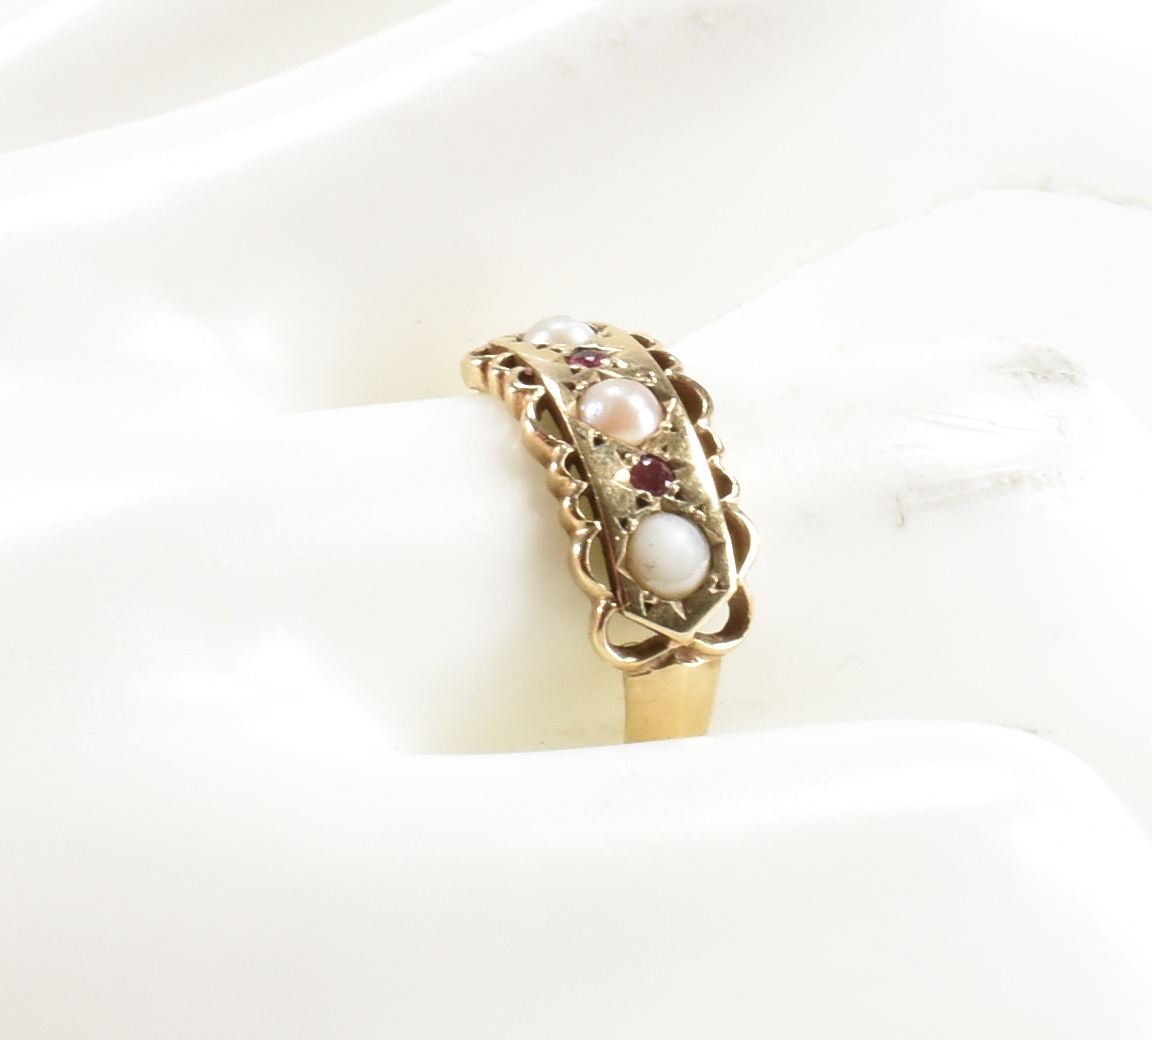 HALLMARKED 9CT GOLD RUBY & CULTURED PEARL RING - Image 7 of 7